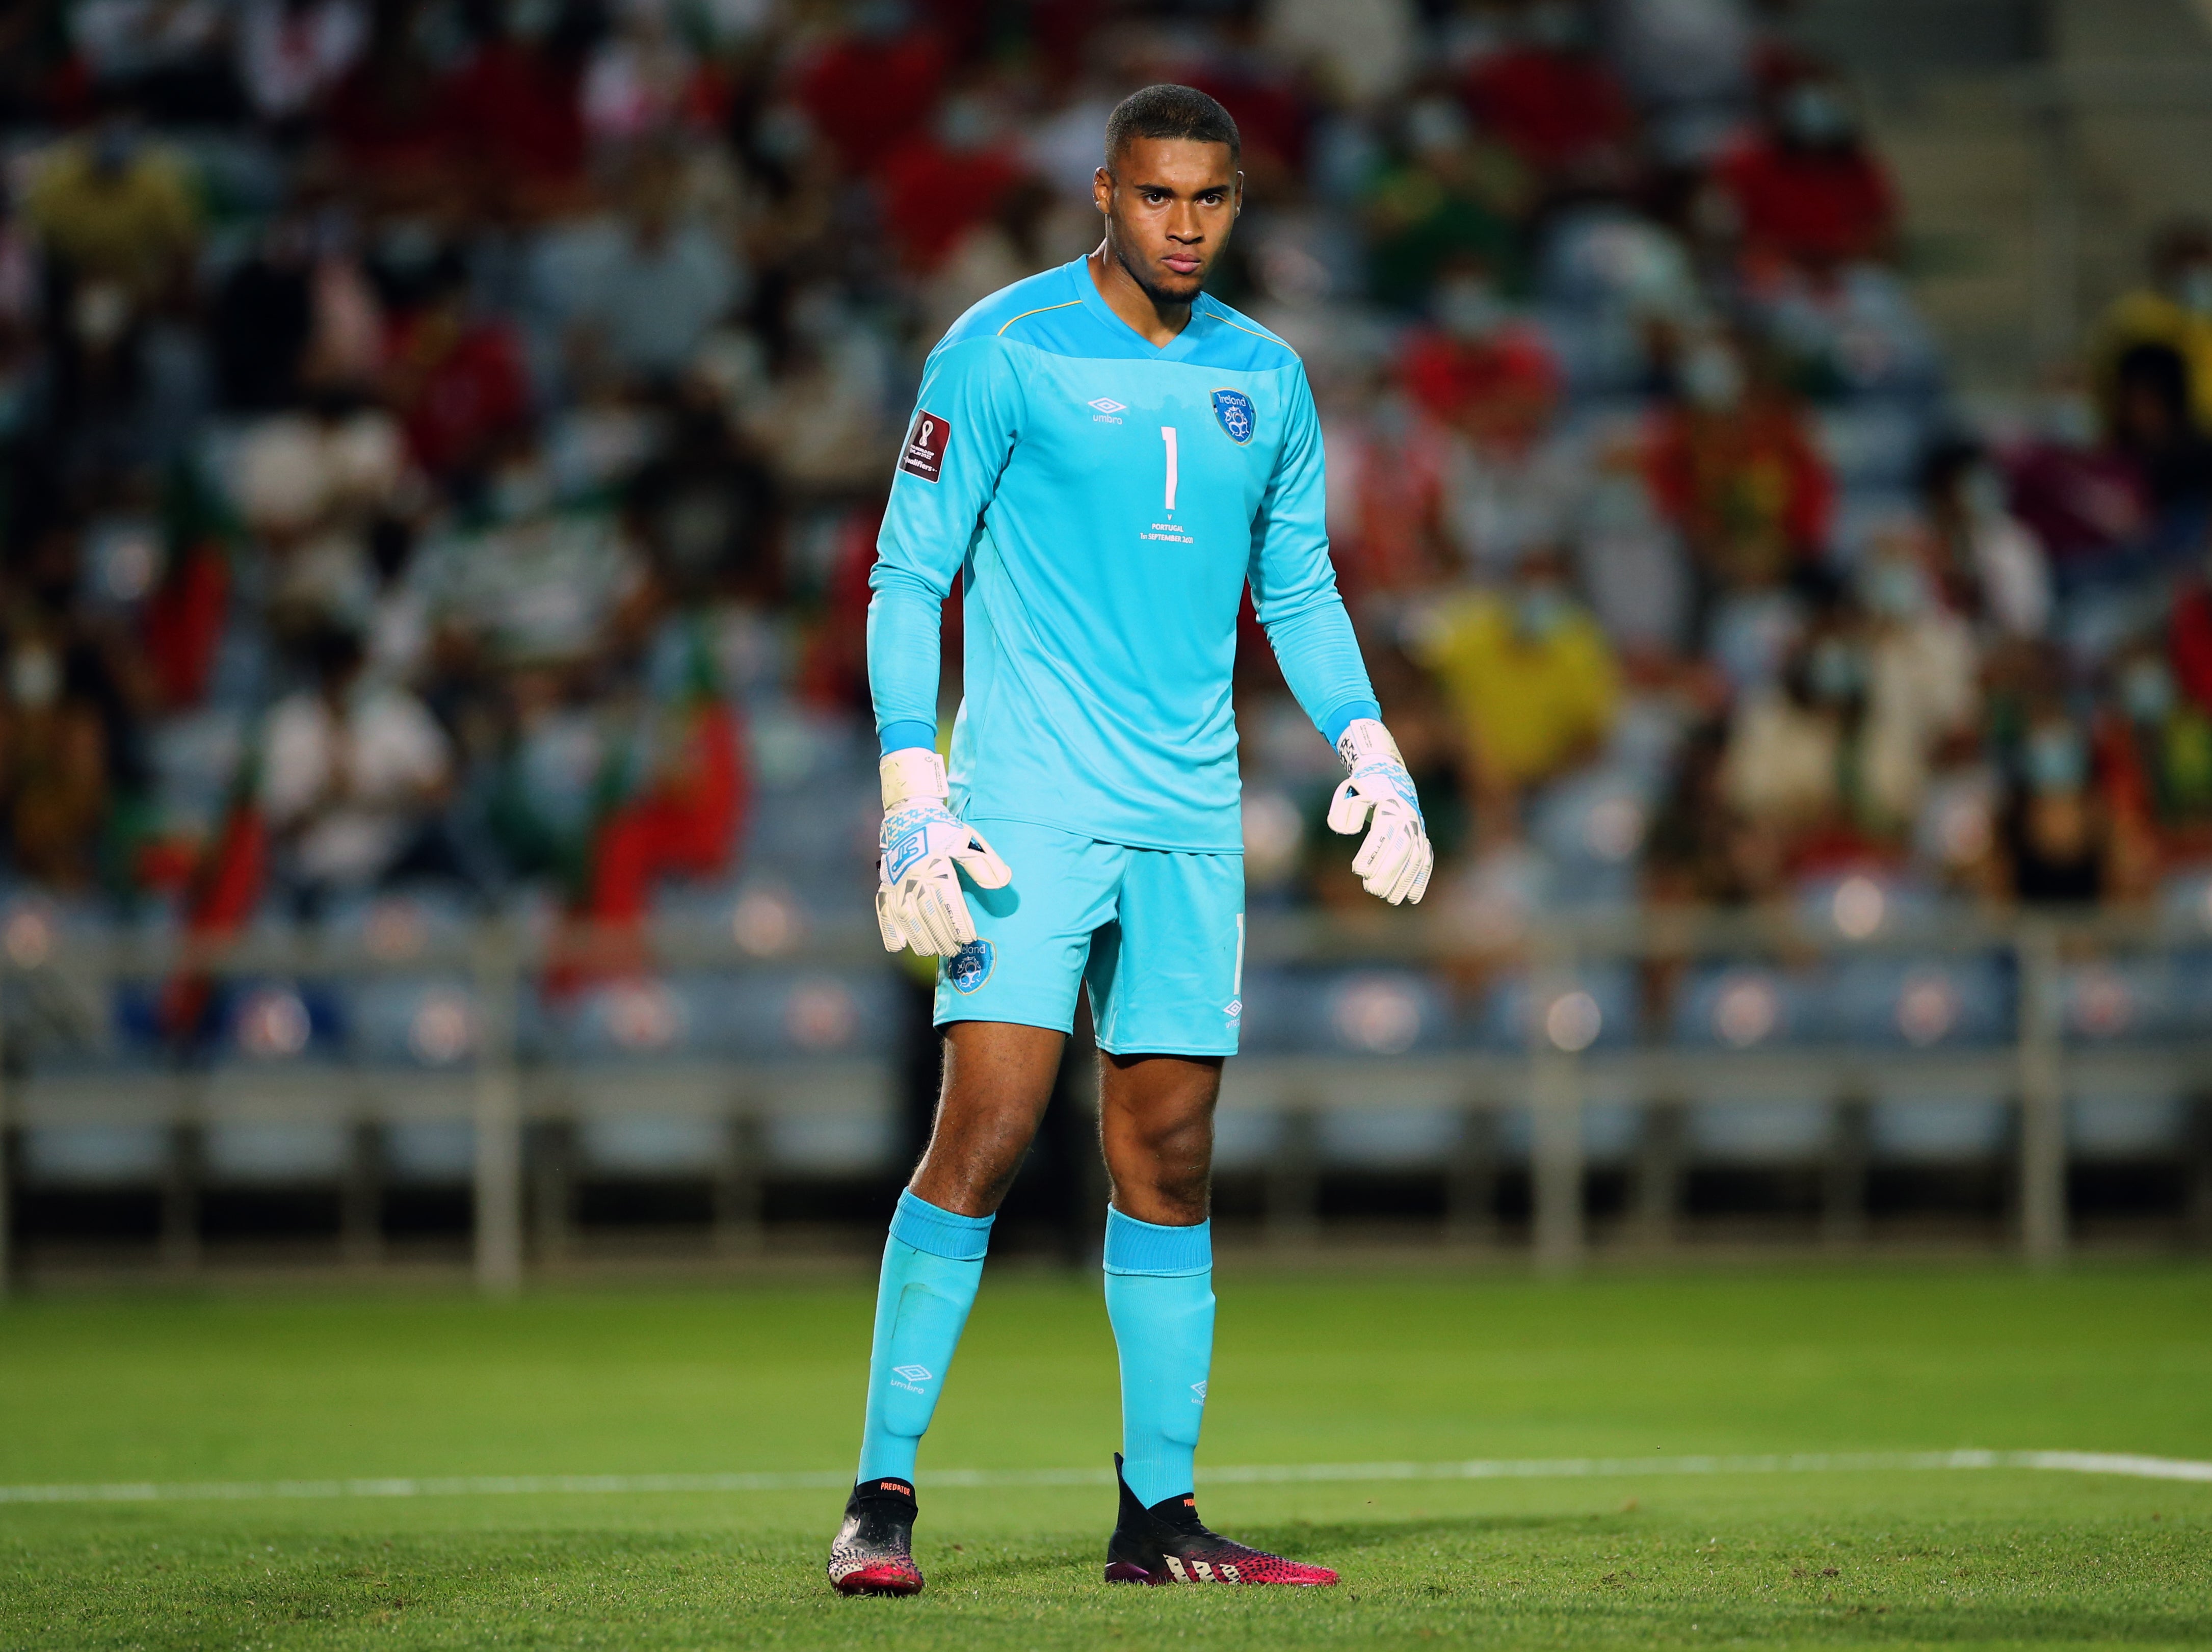 Republic of Ireland goalkeeper Gavin Bazunu is currently on loan to League One Portsmouth from Manchester City (Isabel Infantes/PA)